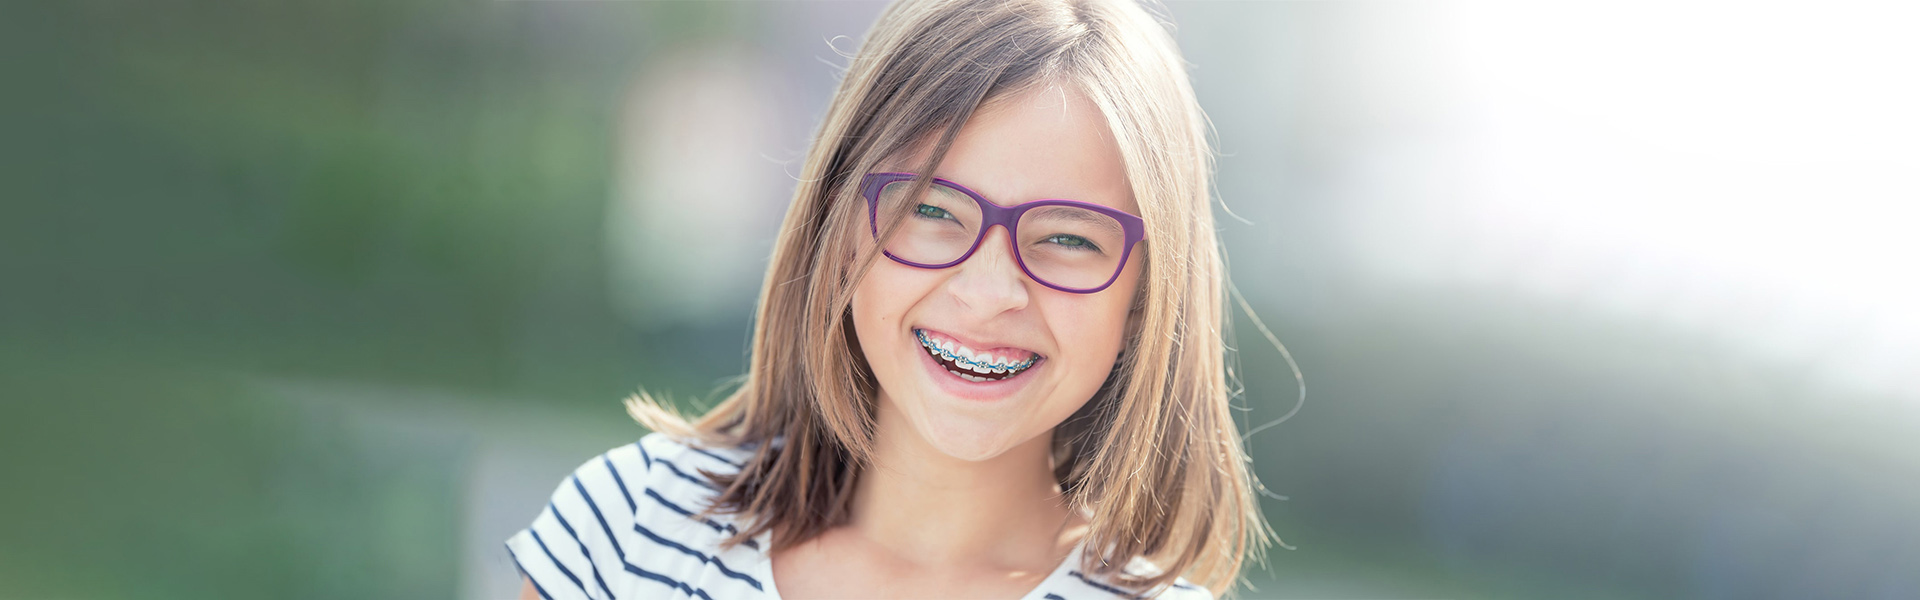 Children Receiving Orthodontic Treatments Early Benefit from Beautiful Teeth and Smile